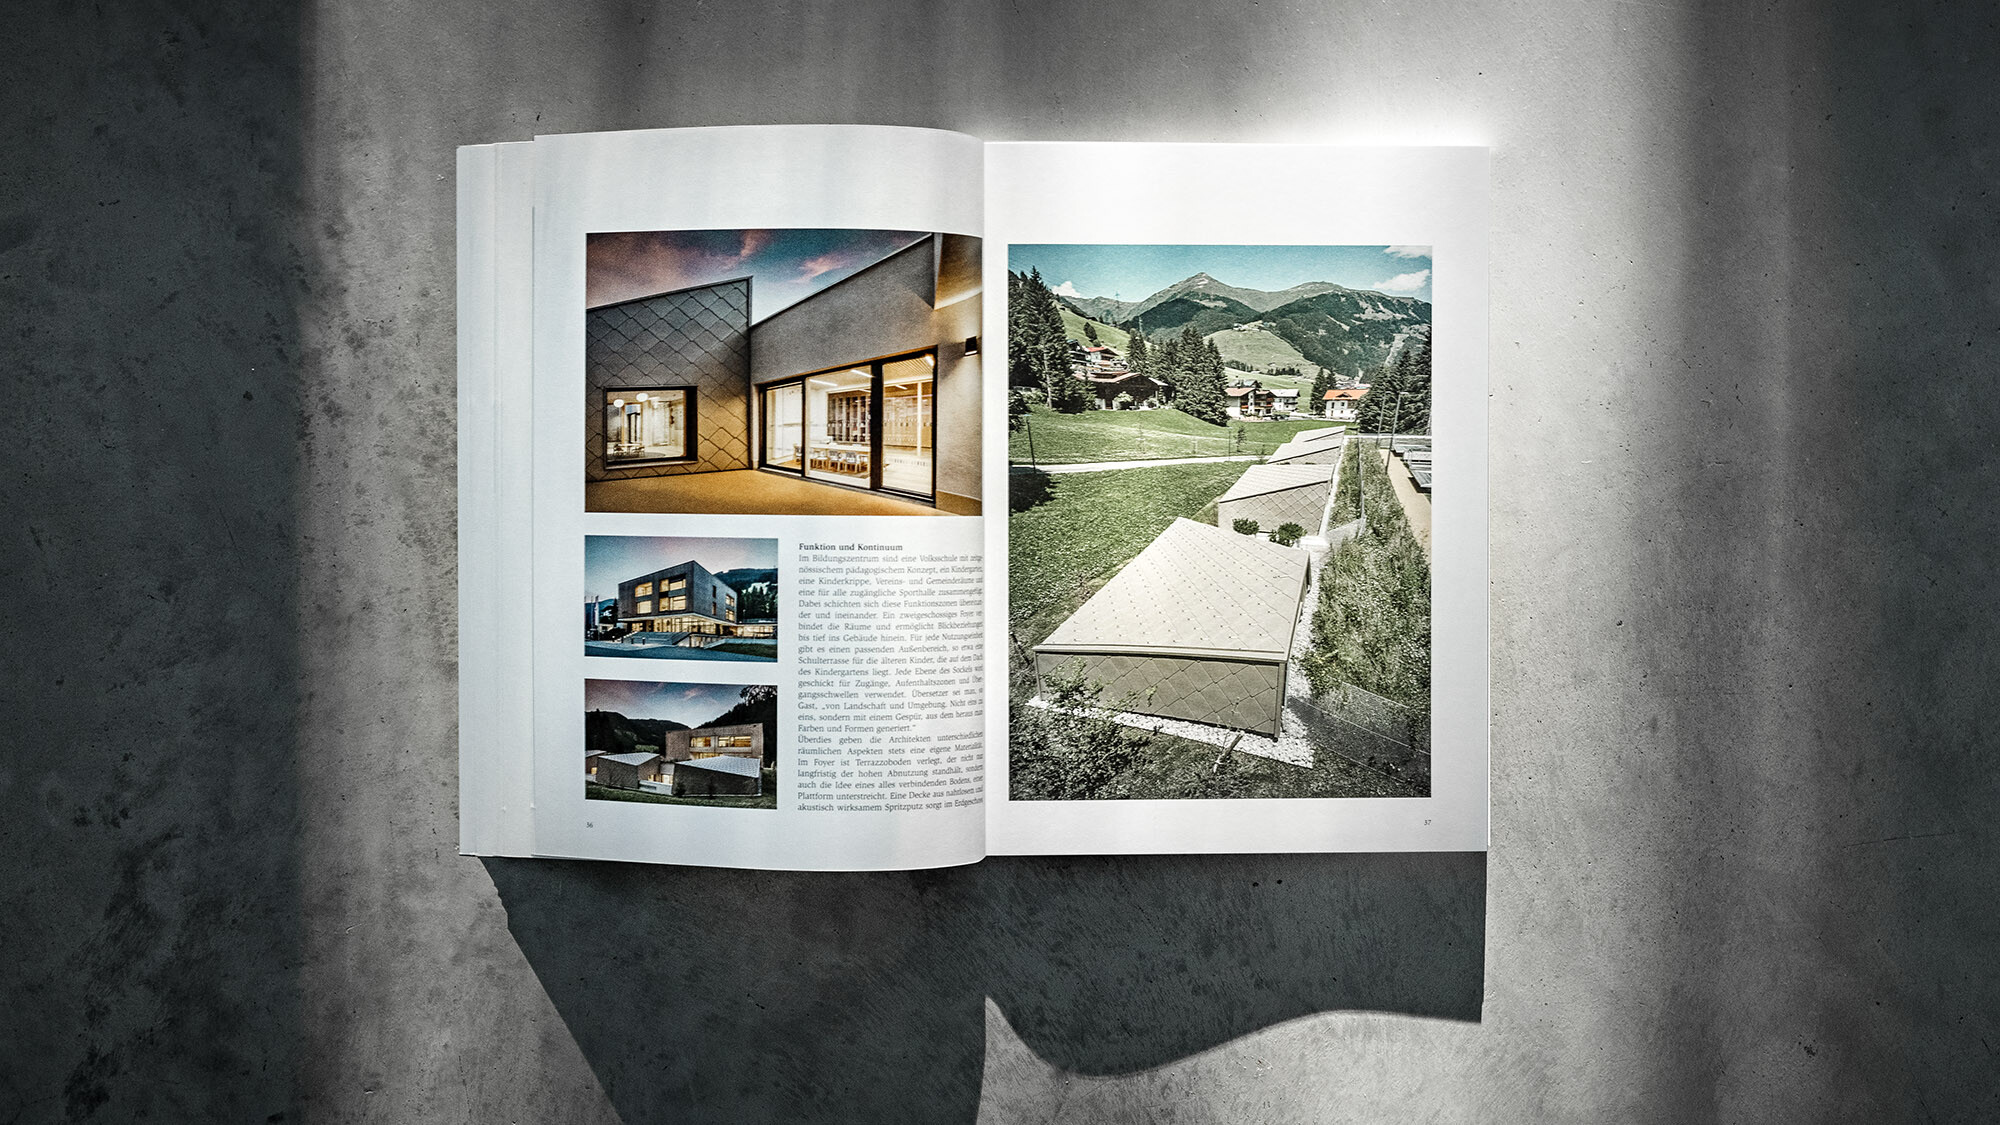 The open PREFARENZEN book 2024 with an article on the Gerlos education centre by UNISONO ARCHITEKTEN before a grey background.